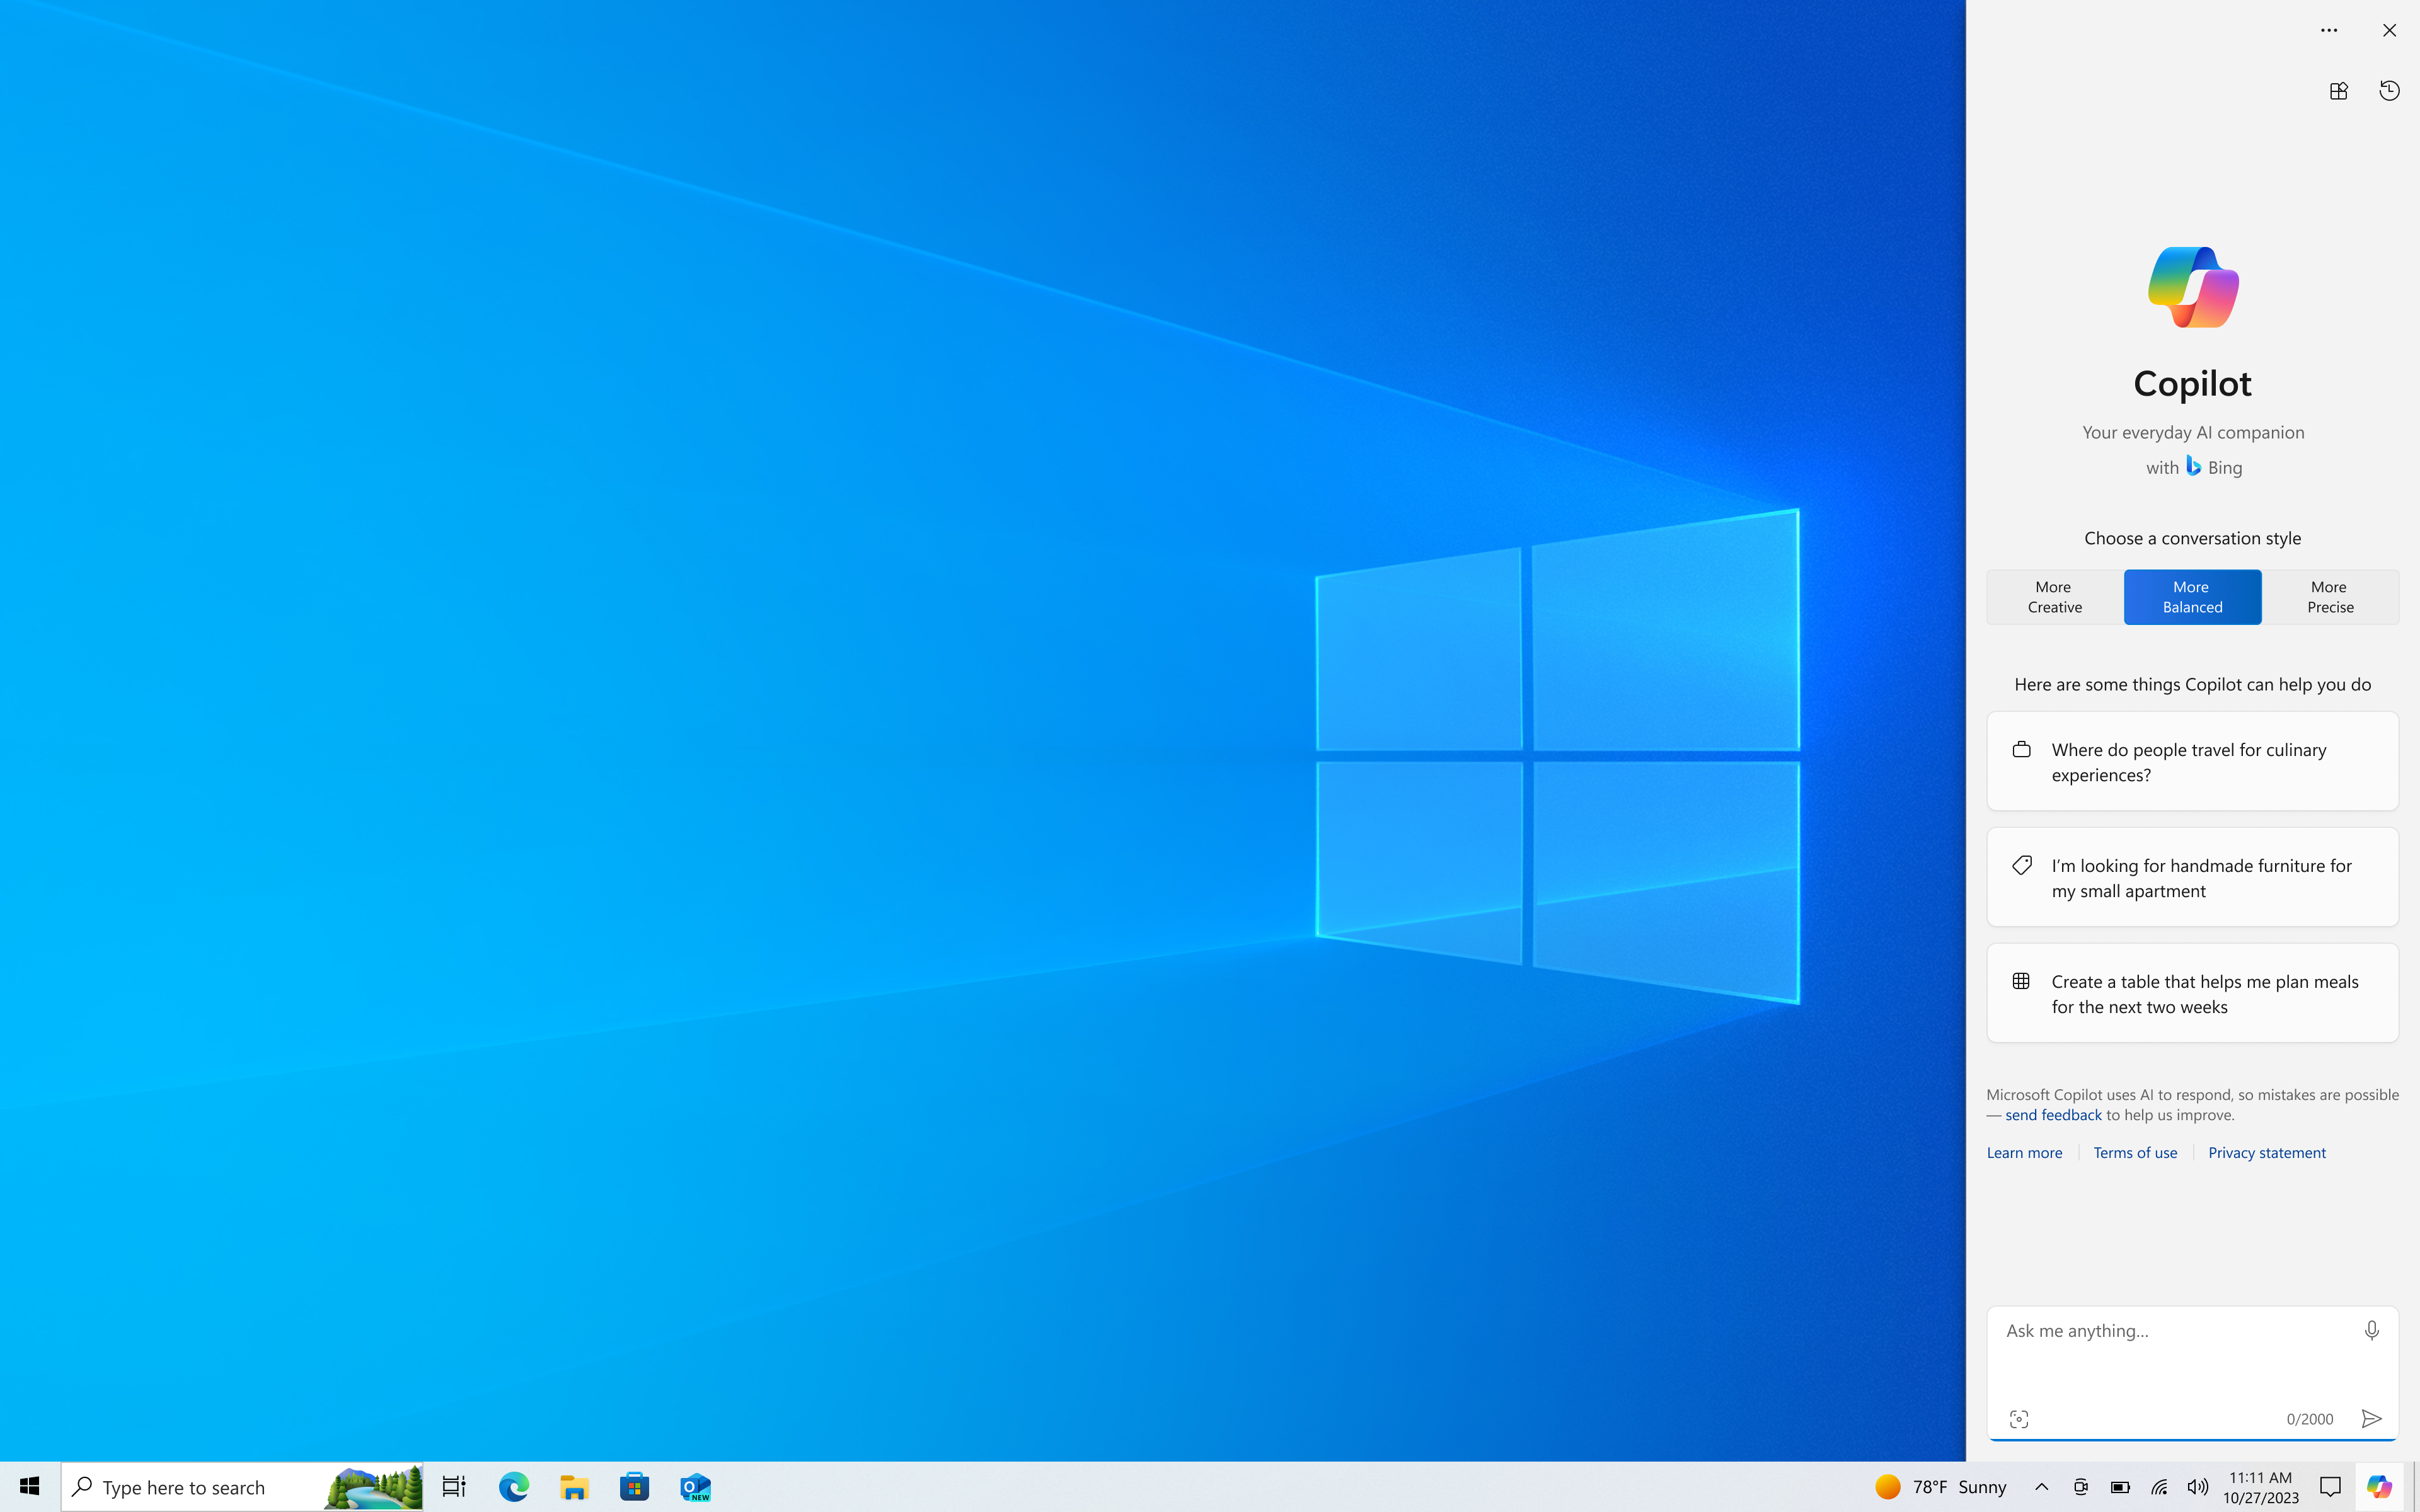 Verify Windows 10 operating system is up to date with latest updates and patches
Run the software in compatibility mode